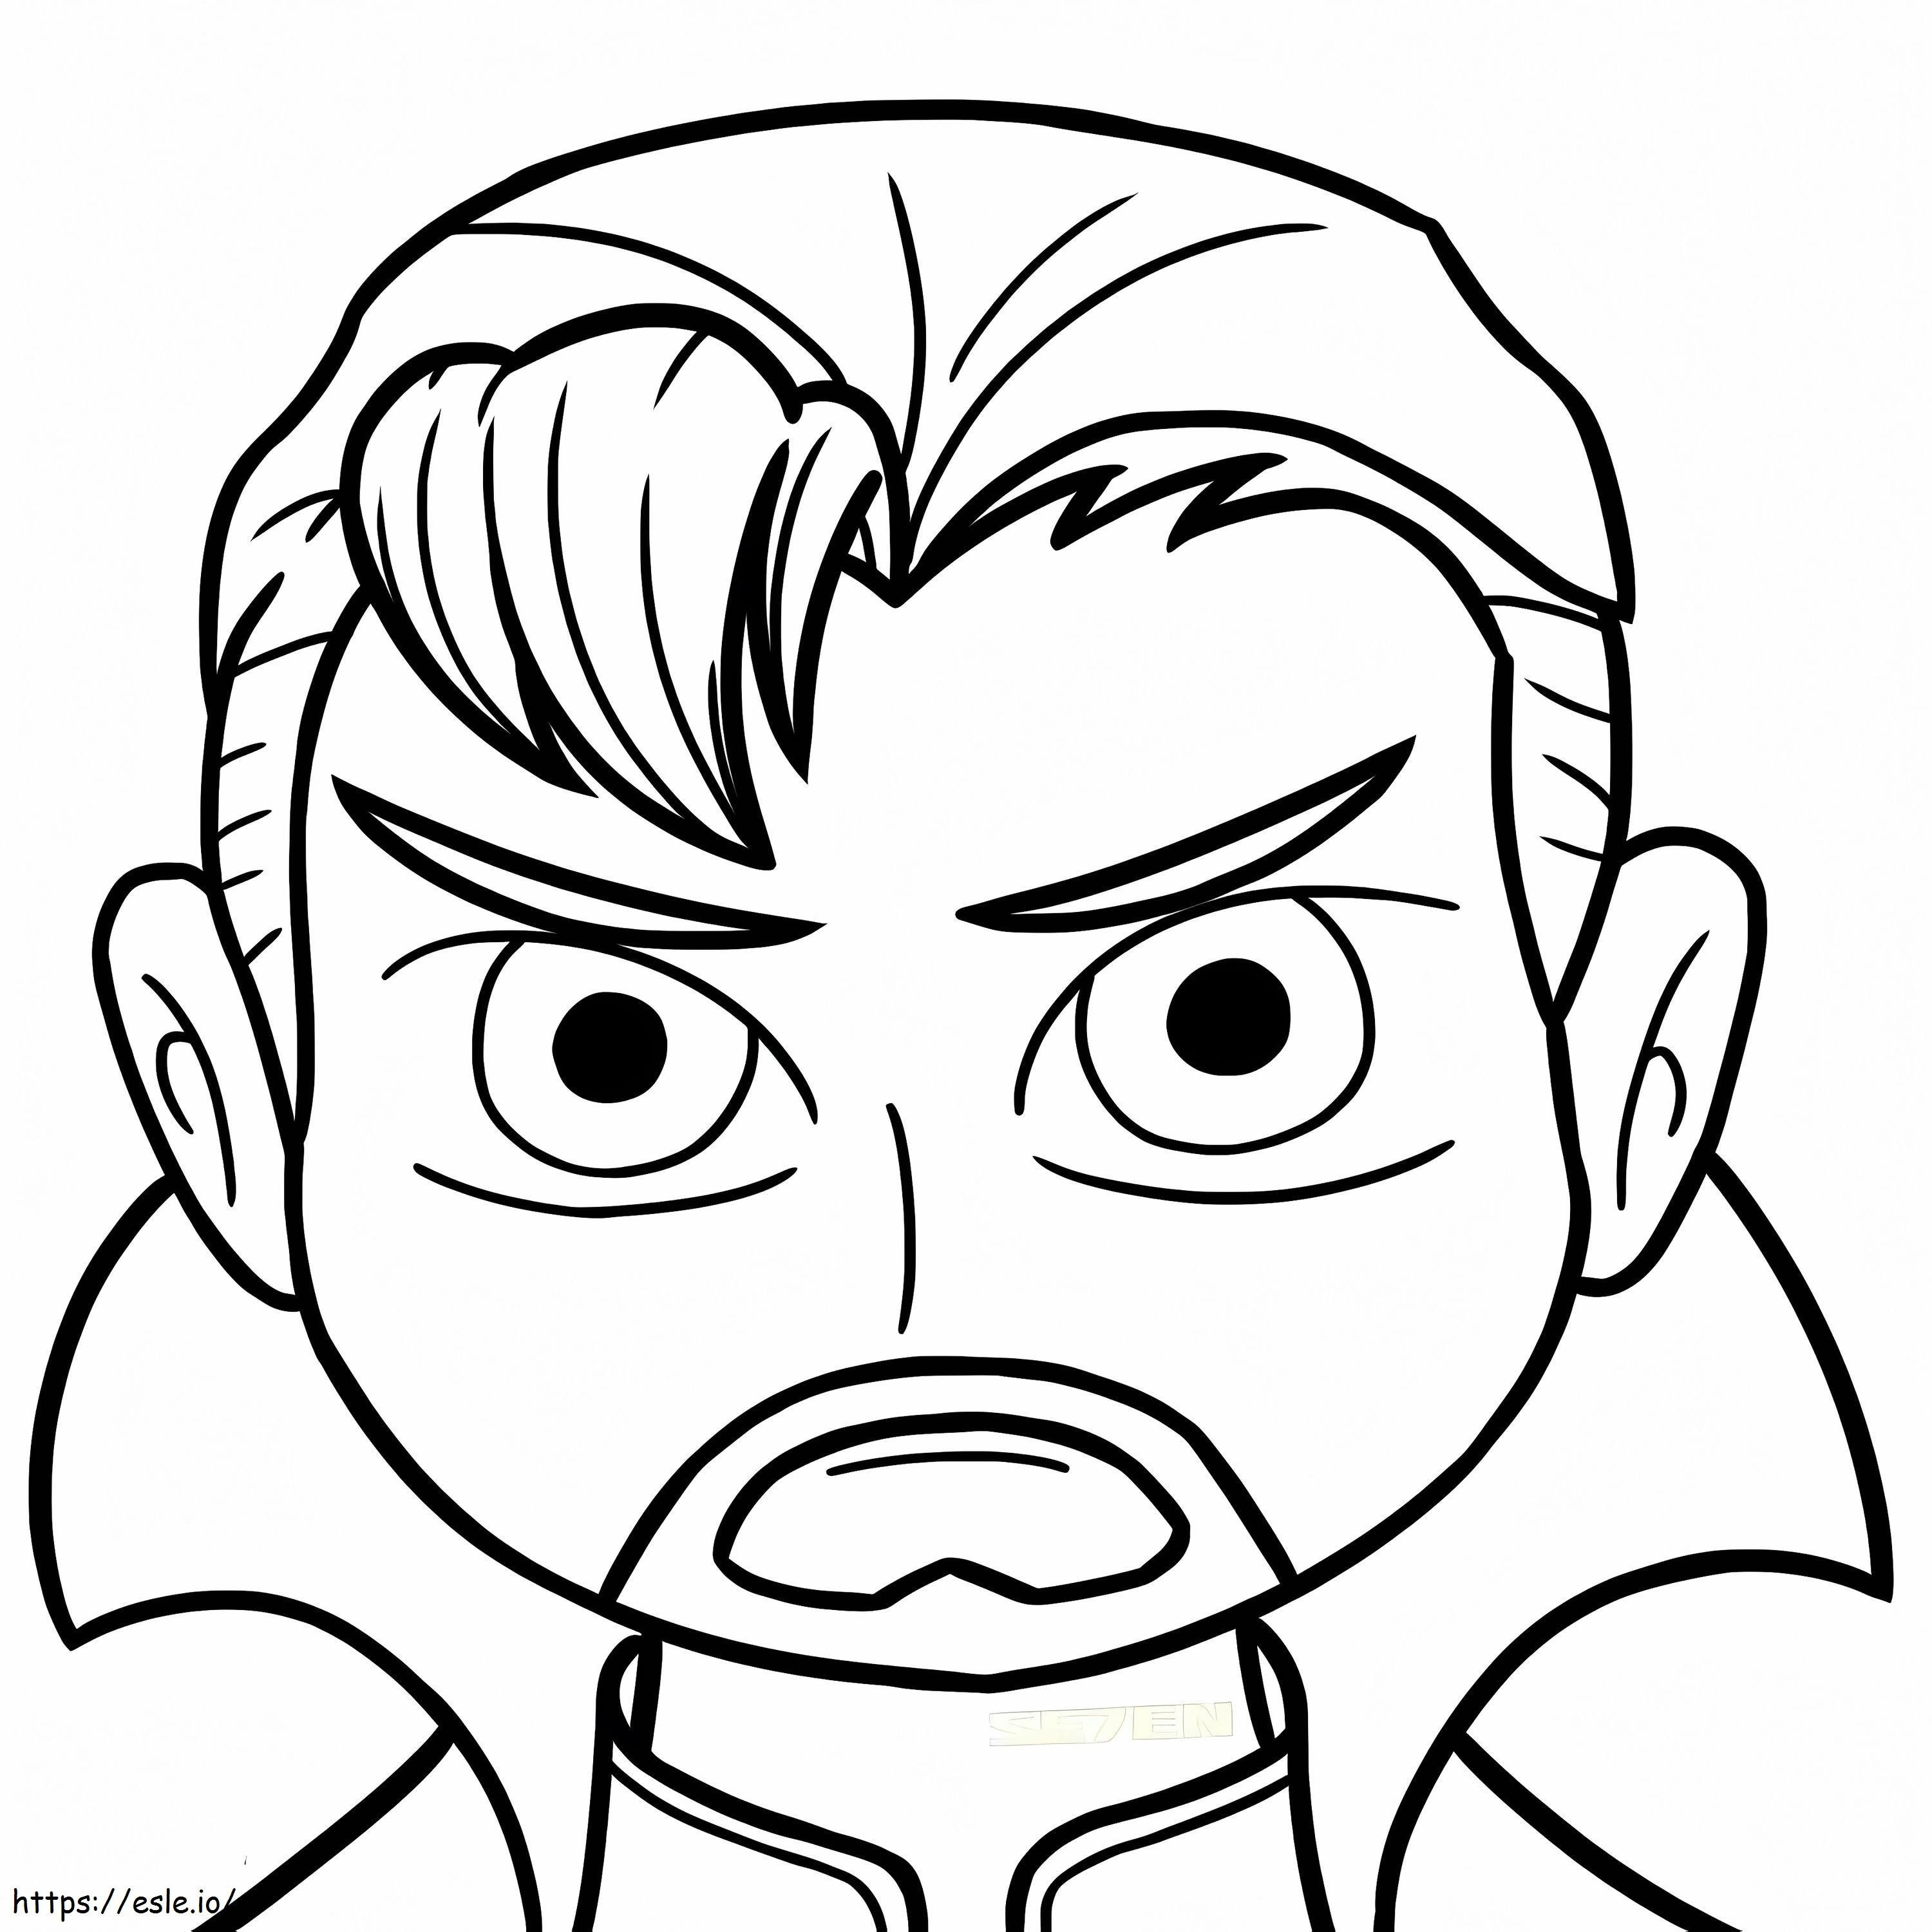 1541230137 Chibi Doctor Strange 2 By Mmuaz70 Dbxy3Ny coloring page